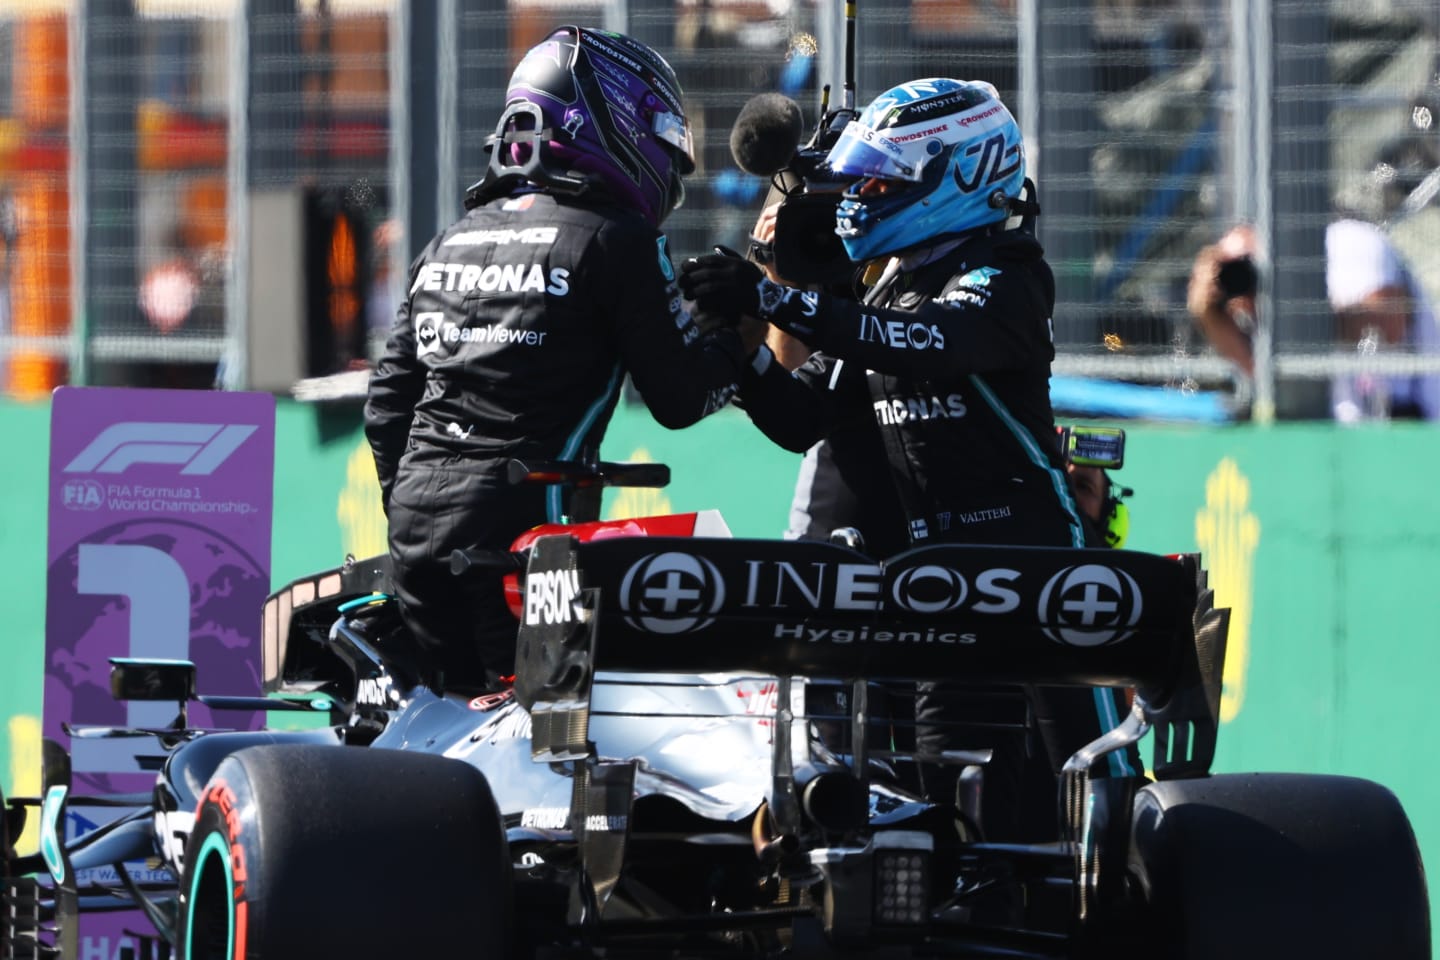 BUDAPEST, HUNGARY - JULY 31: Pole position qualifier Lewis Hamilton of Great Britain and Mercedes GP and second place qualifier Valtteri Bottas of Finland and Mercedes GP celebrate in parc ferme during qualifying ahead of the F1 Grand Prix of Hungary at Hungaroring on July 31, 2021 in Budapest, Hungary. (Photo by Bryn Lennon/Getty Images)